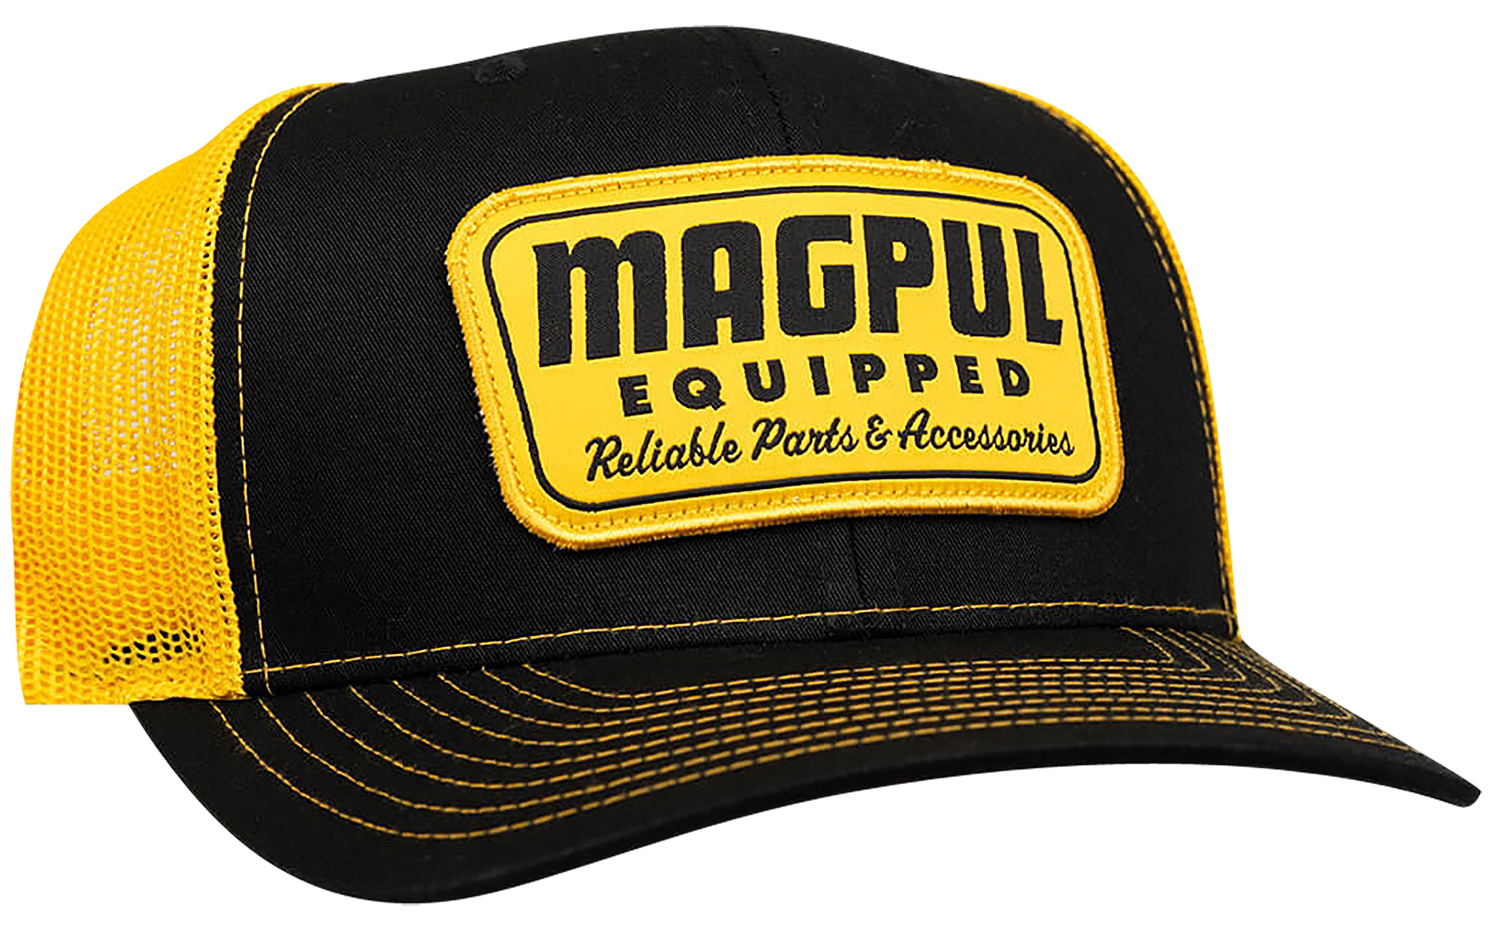 Magpul MAG1179-005 Equipped Trucker Hat Black/Gold Adjustable Snapback OSFA Structured